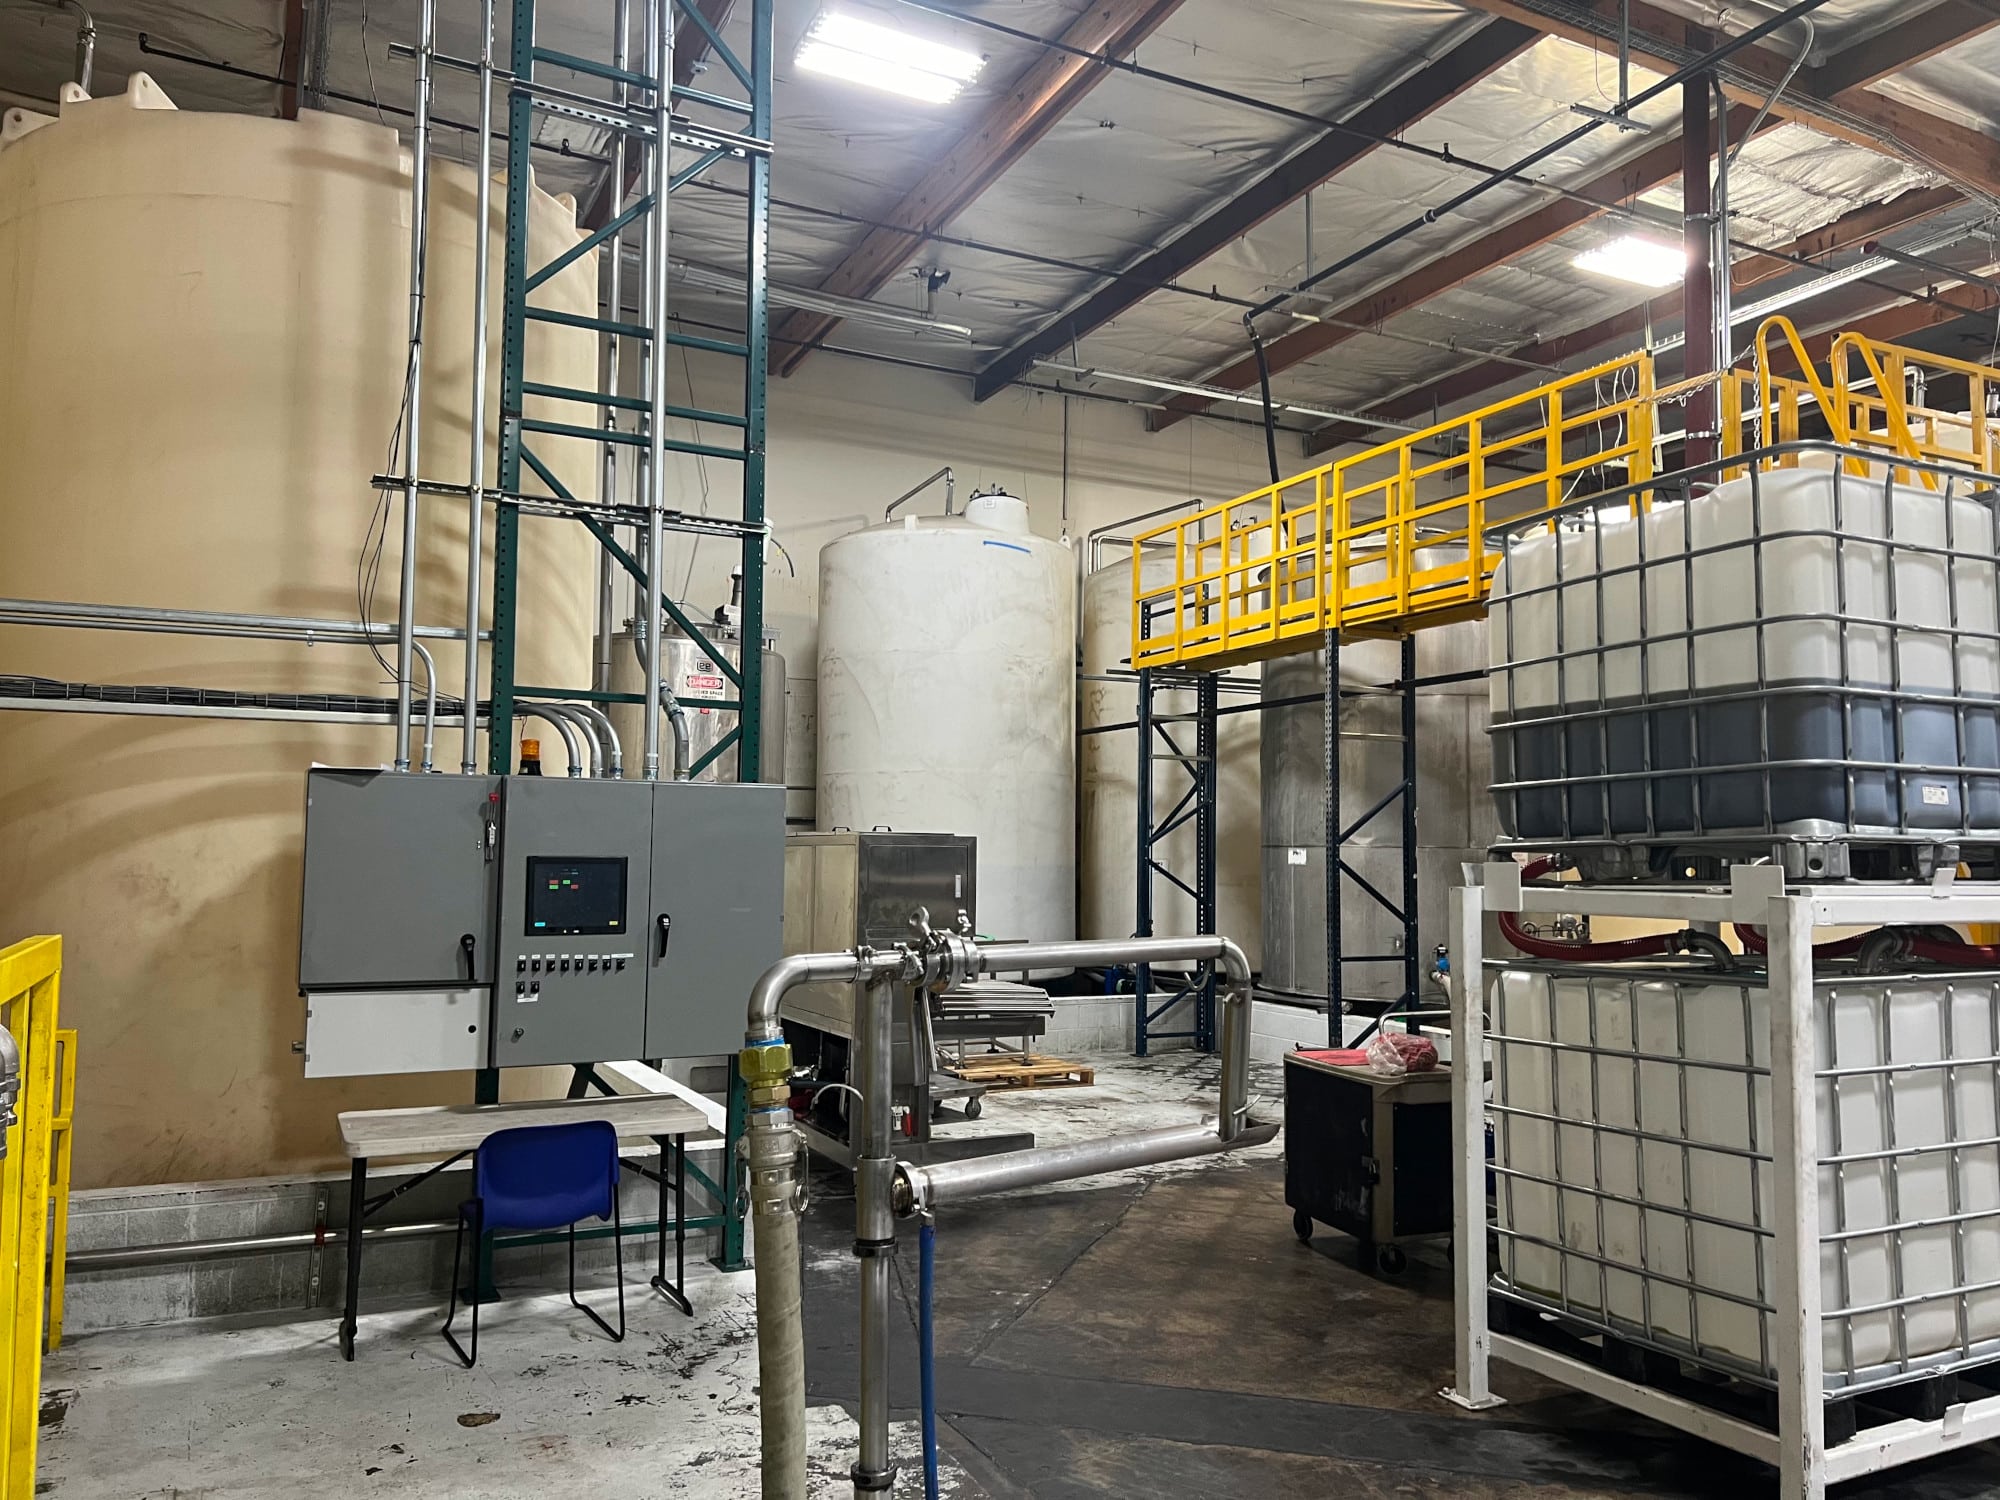 Production Area with Totes and Stainless Steel Tanks for Mixing Cooking Oils